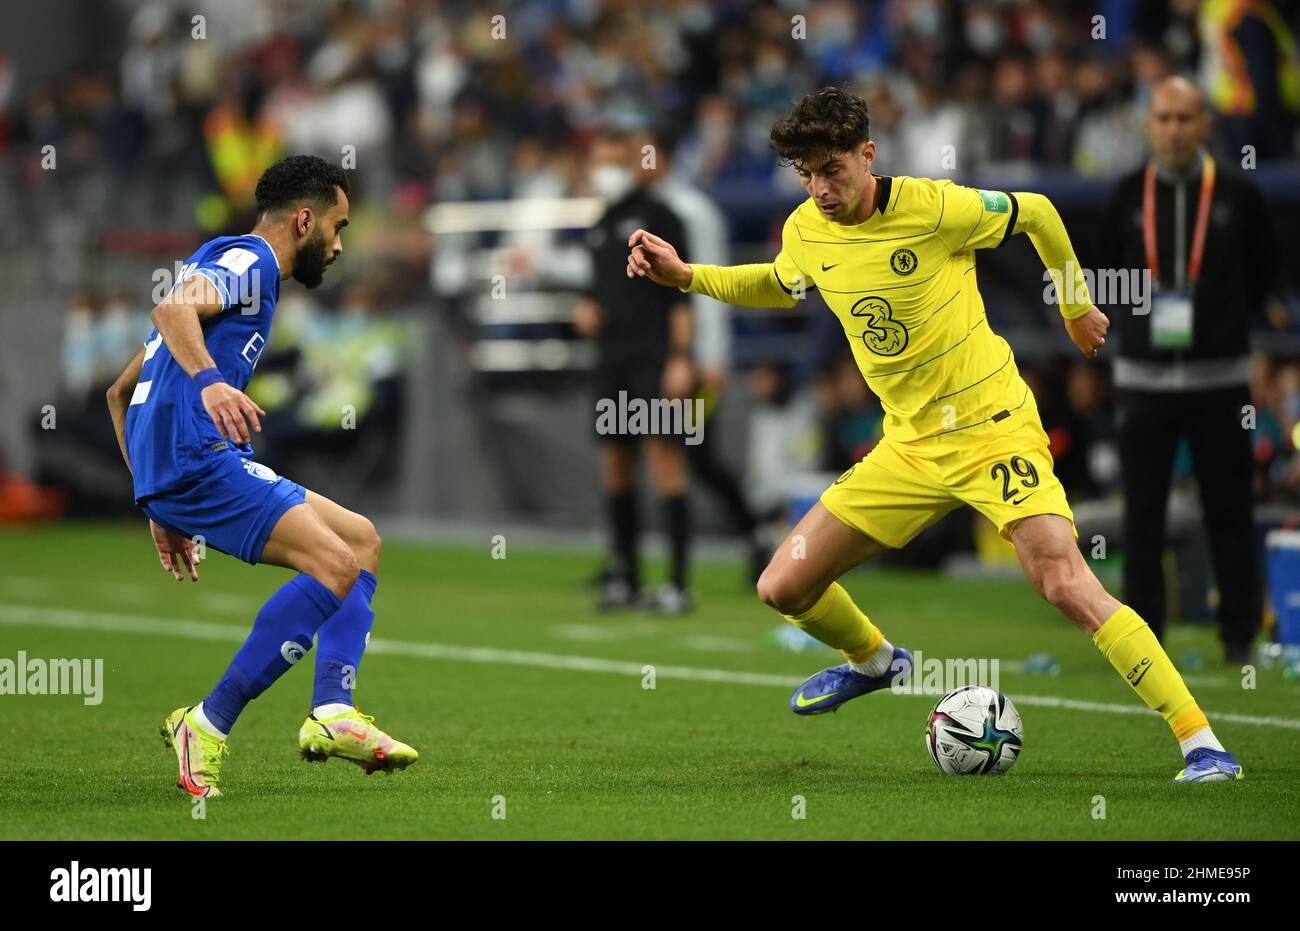 Al-Hilal's Mohammed Al-Breik (left) and Chelsea's Kai Havertz battle for the ball during the FIFA Club World Cup, Semi Final match at the Mohammed Bin Zayed Stadium in Abu Dhabi, United Arab Emirates. Picture date: Wednesday February 9, 2022. Stock Photo